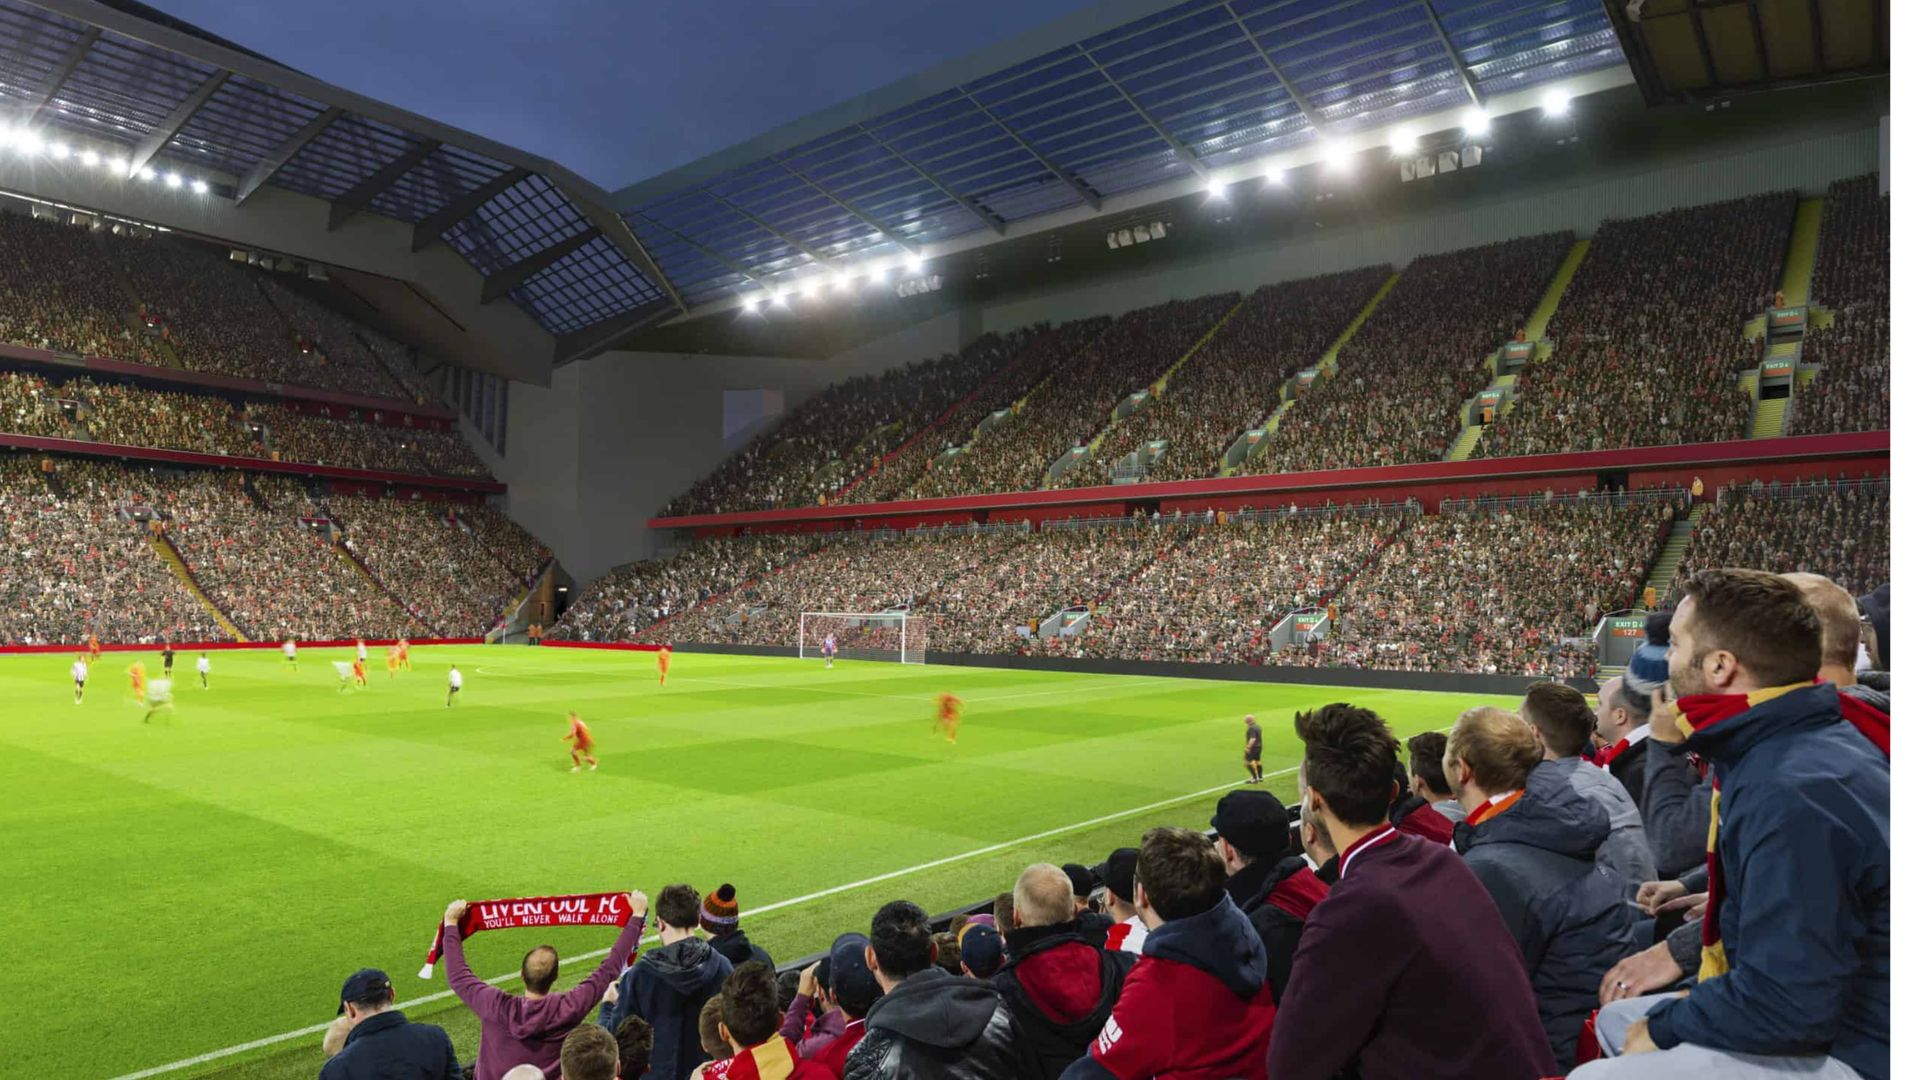 How much could Anfield Road End difficulties cost Liverpool and FSG?